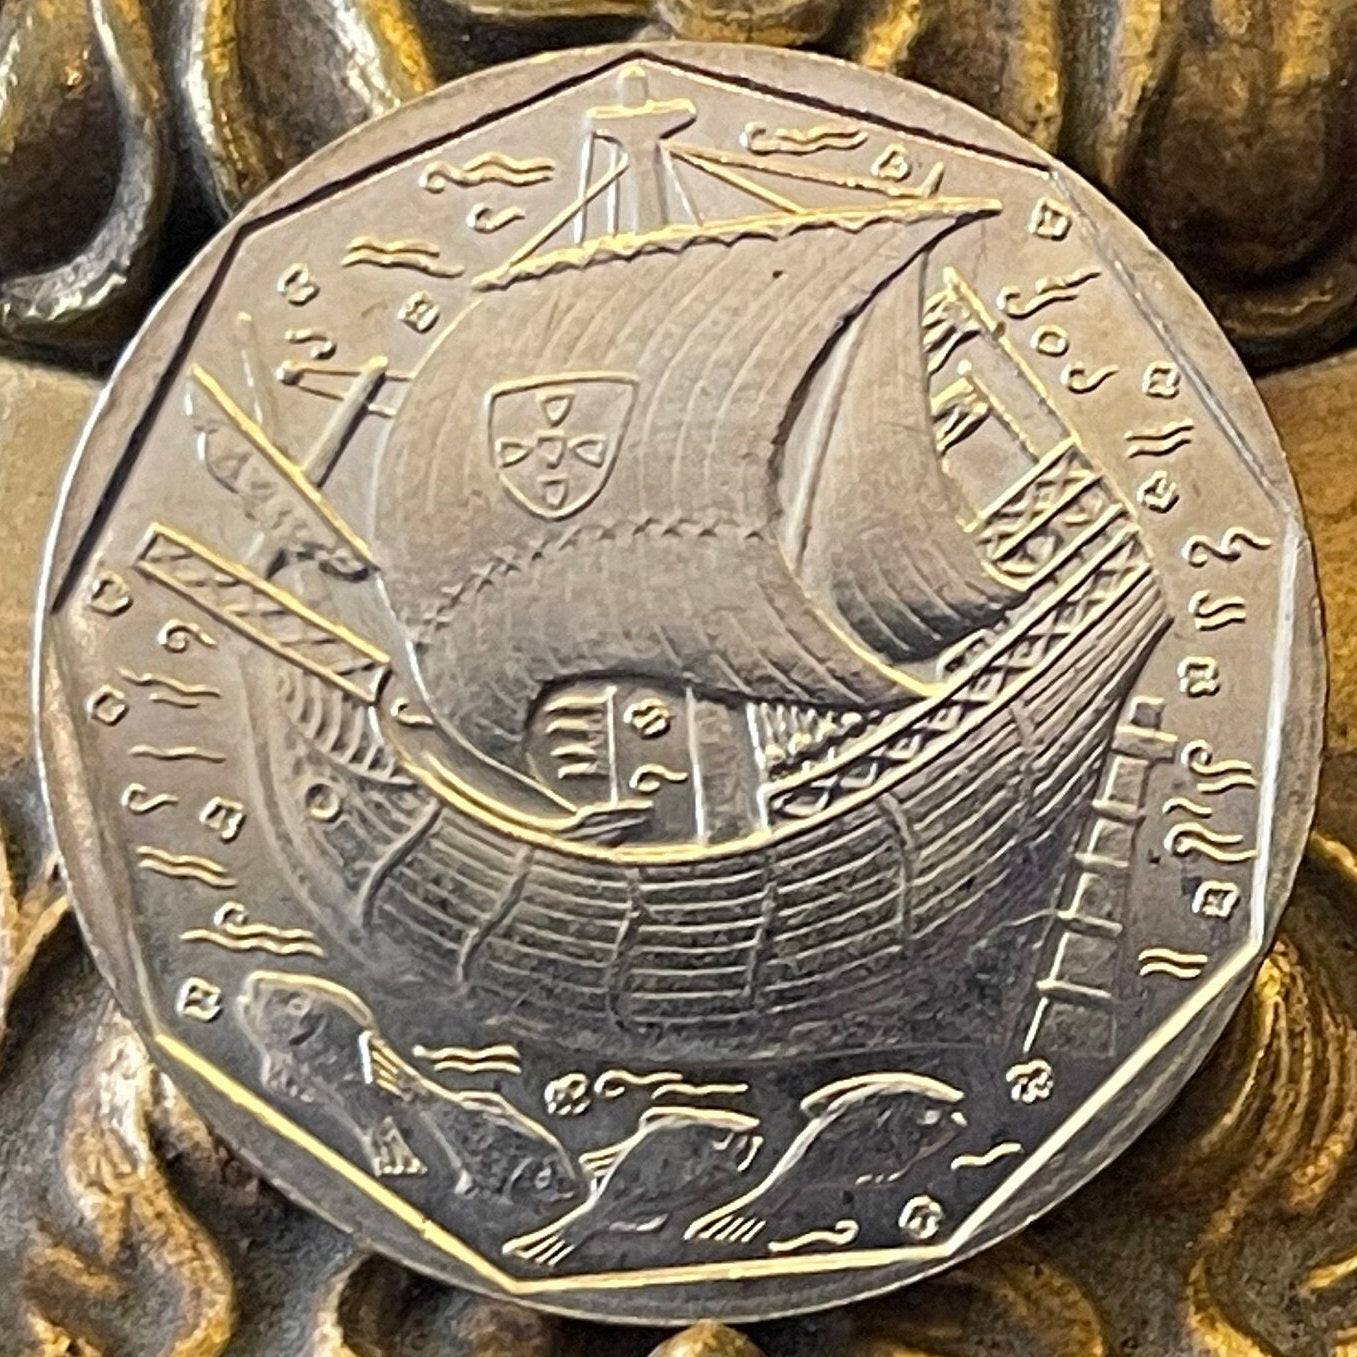 Caravel Ship & Cod Fish 50 Escudos Portugal Authentic Coin Money for Jewelry and Craft Making (Fishing Boat)